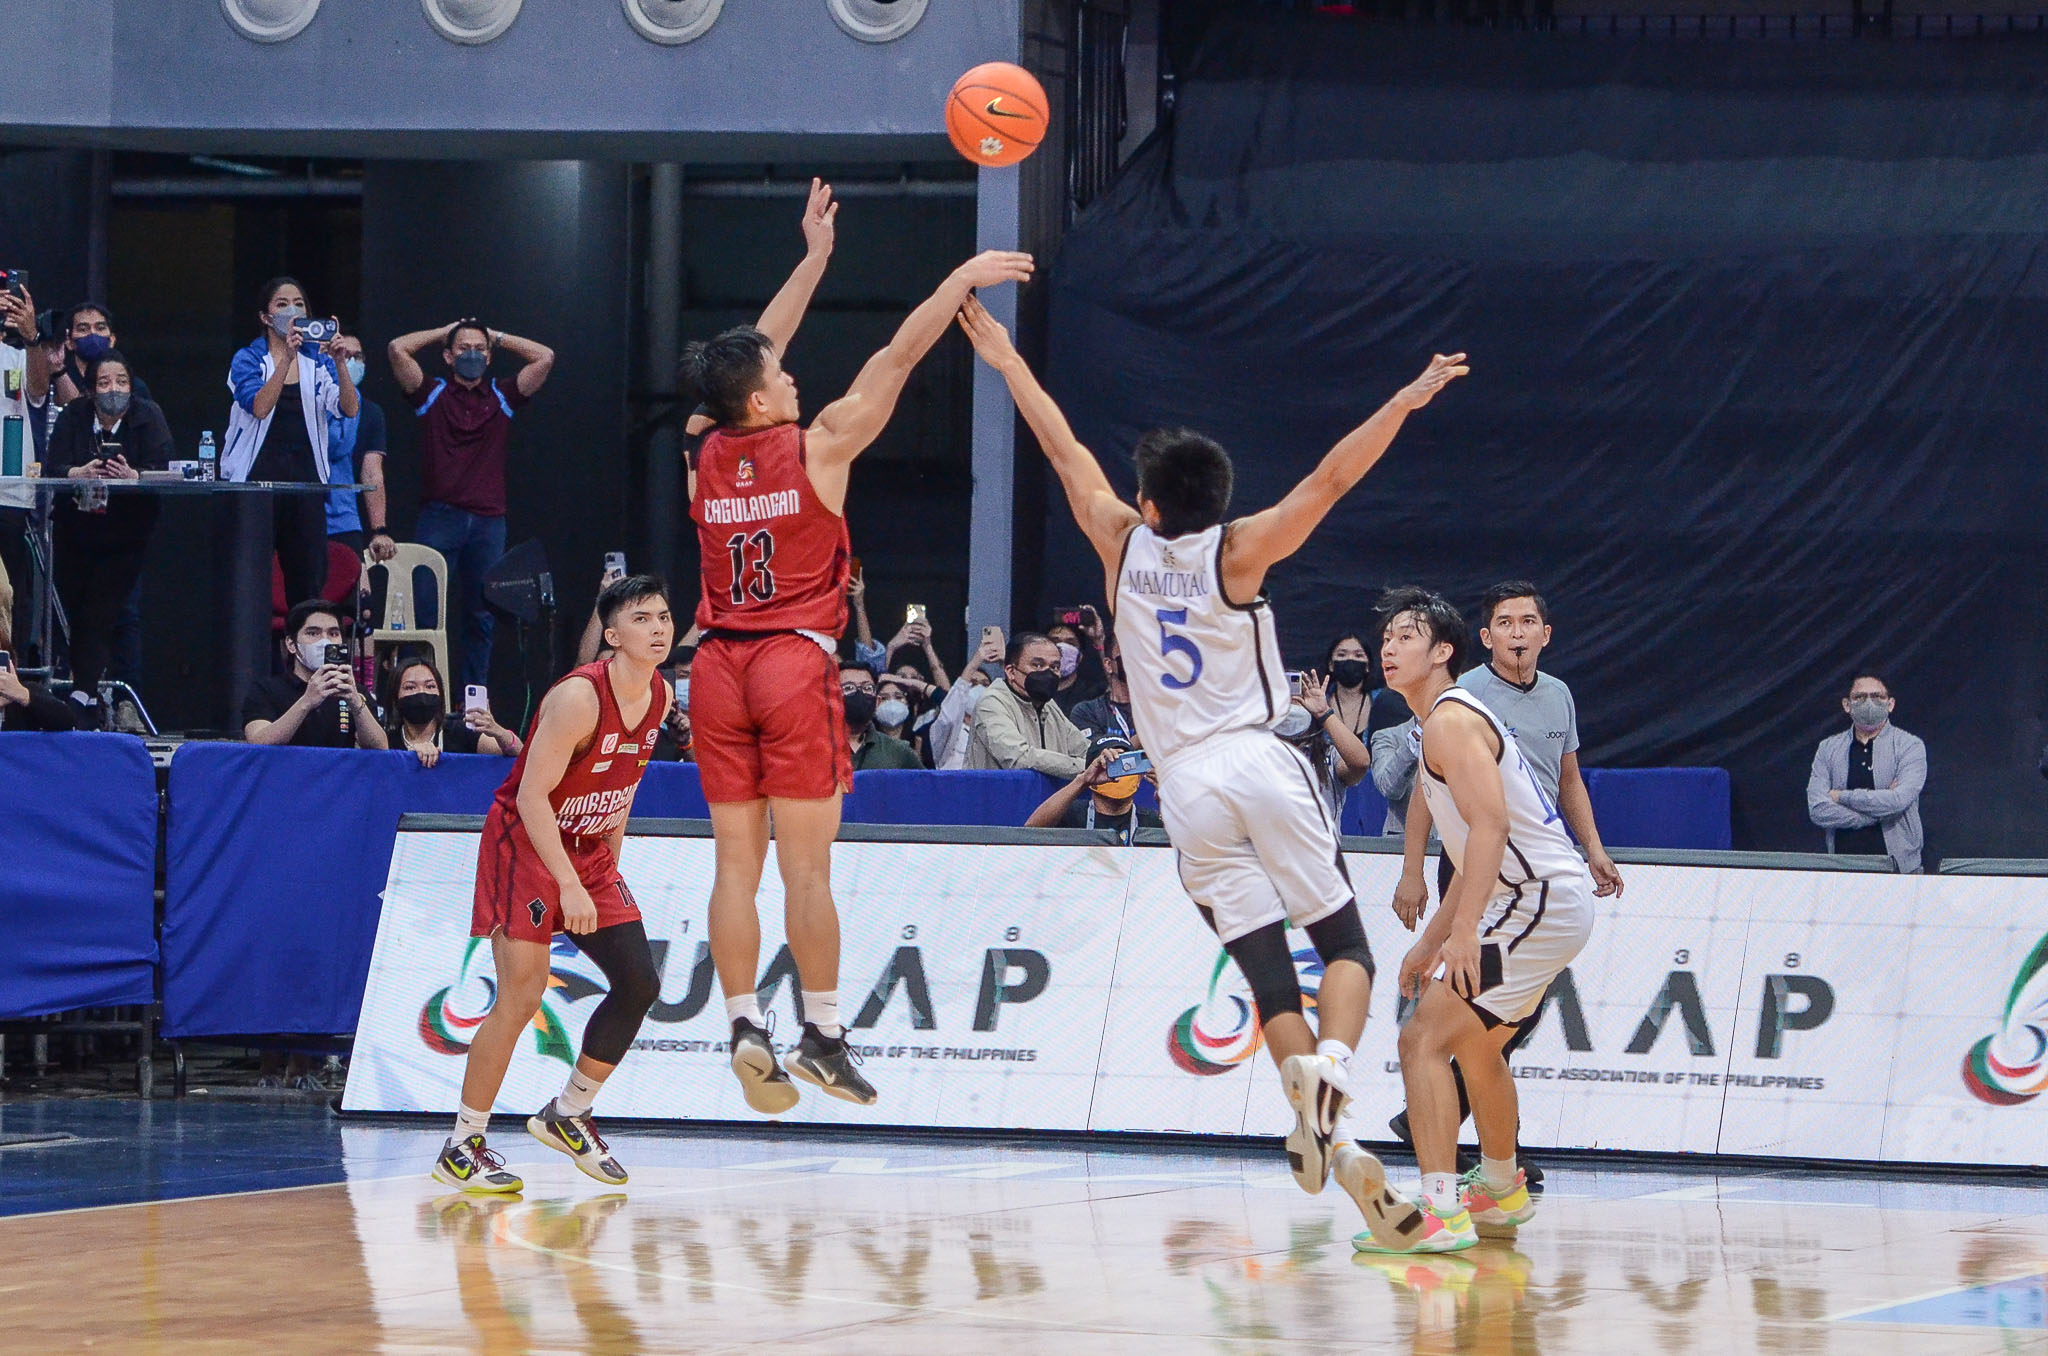 UAAP-84-MBB-ADMU-vs.-UP-Finals-G3-Joel-Cagulangan-1246 UAAP 84: Cagulangan ends UP's 36-year title drought, Ateneo's dynasty ADMU Basketball News UAAP UP  - philippine sports news